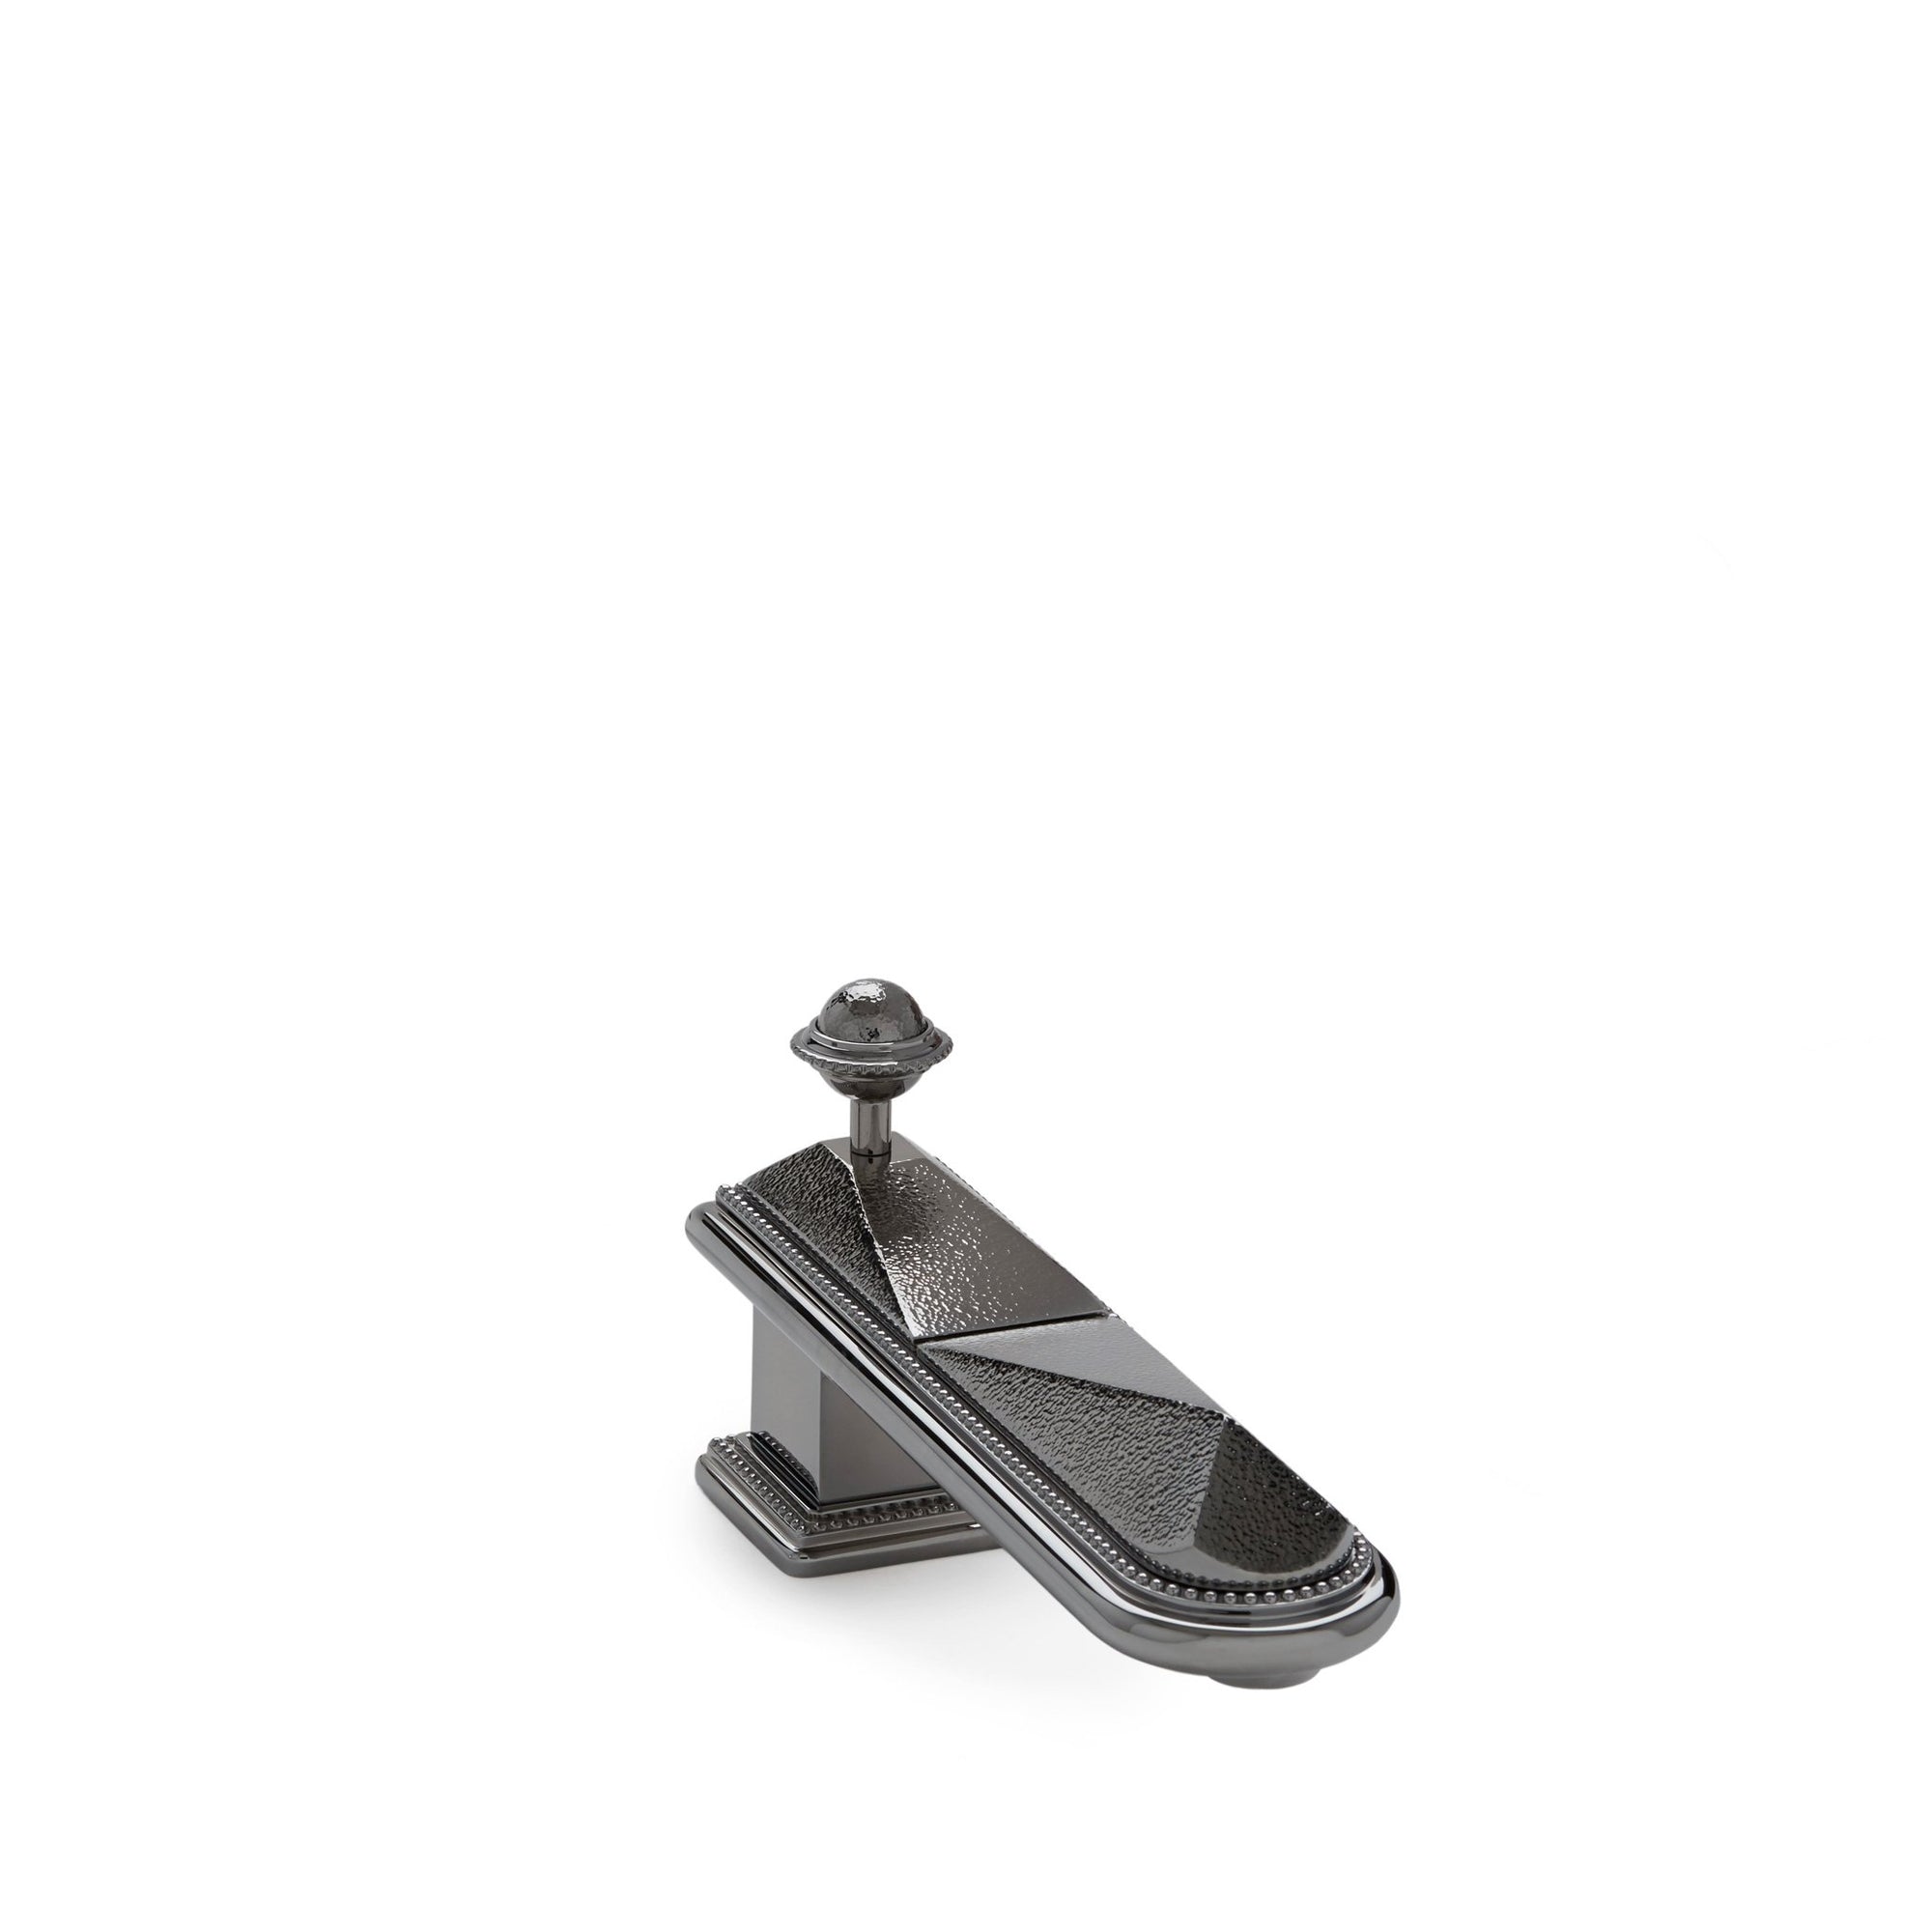 0803DKT-HMRD-CP Sherle Wagner International Hammered Pyramid Deck Mount Tub Spout in Polished Chrome metal finish